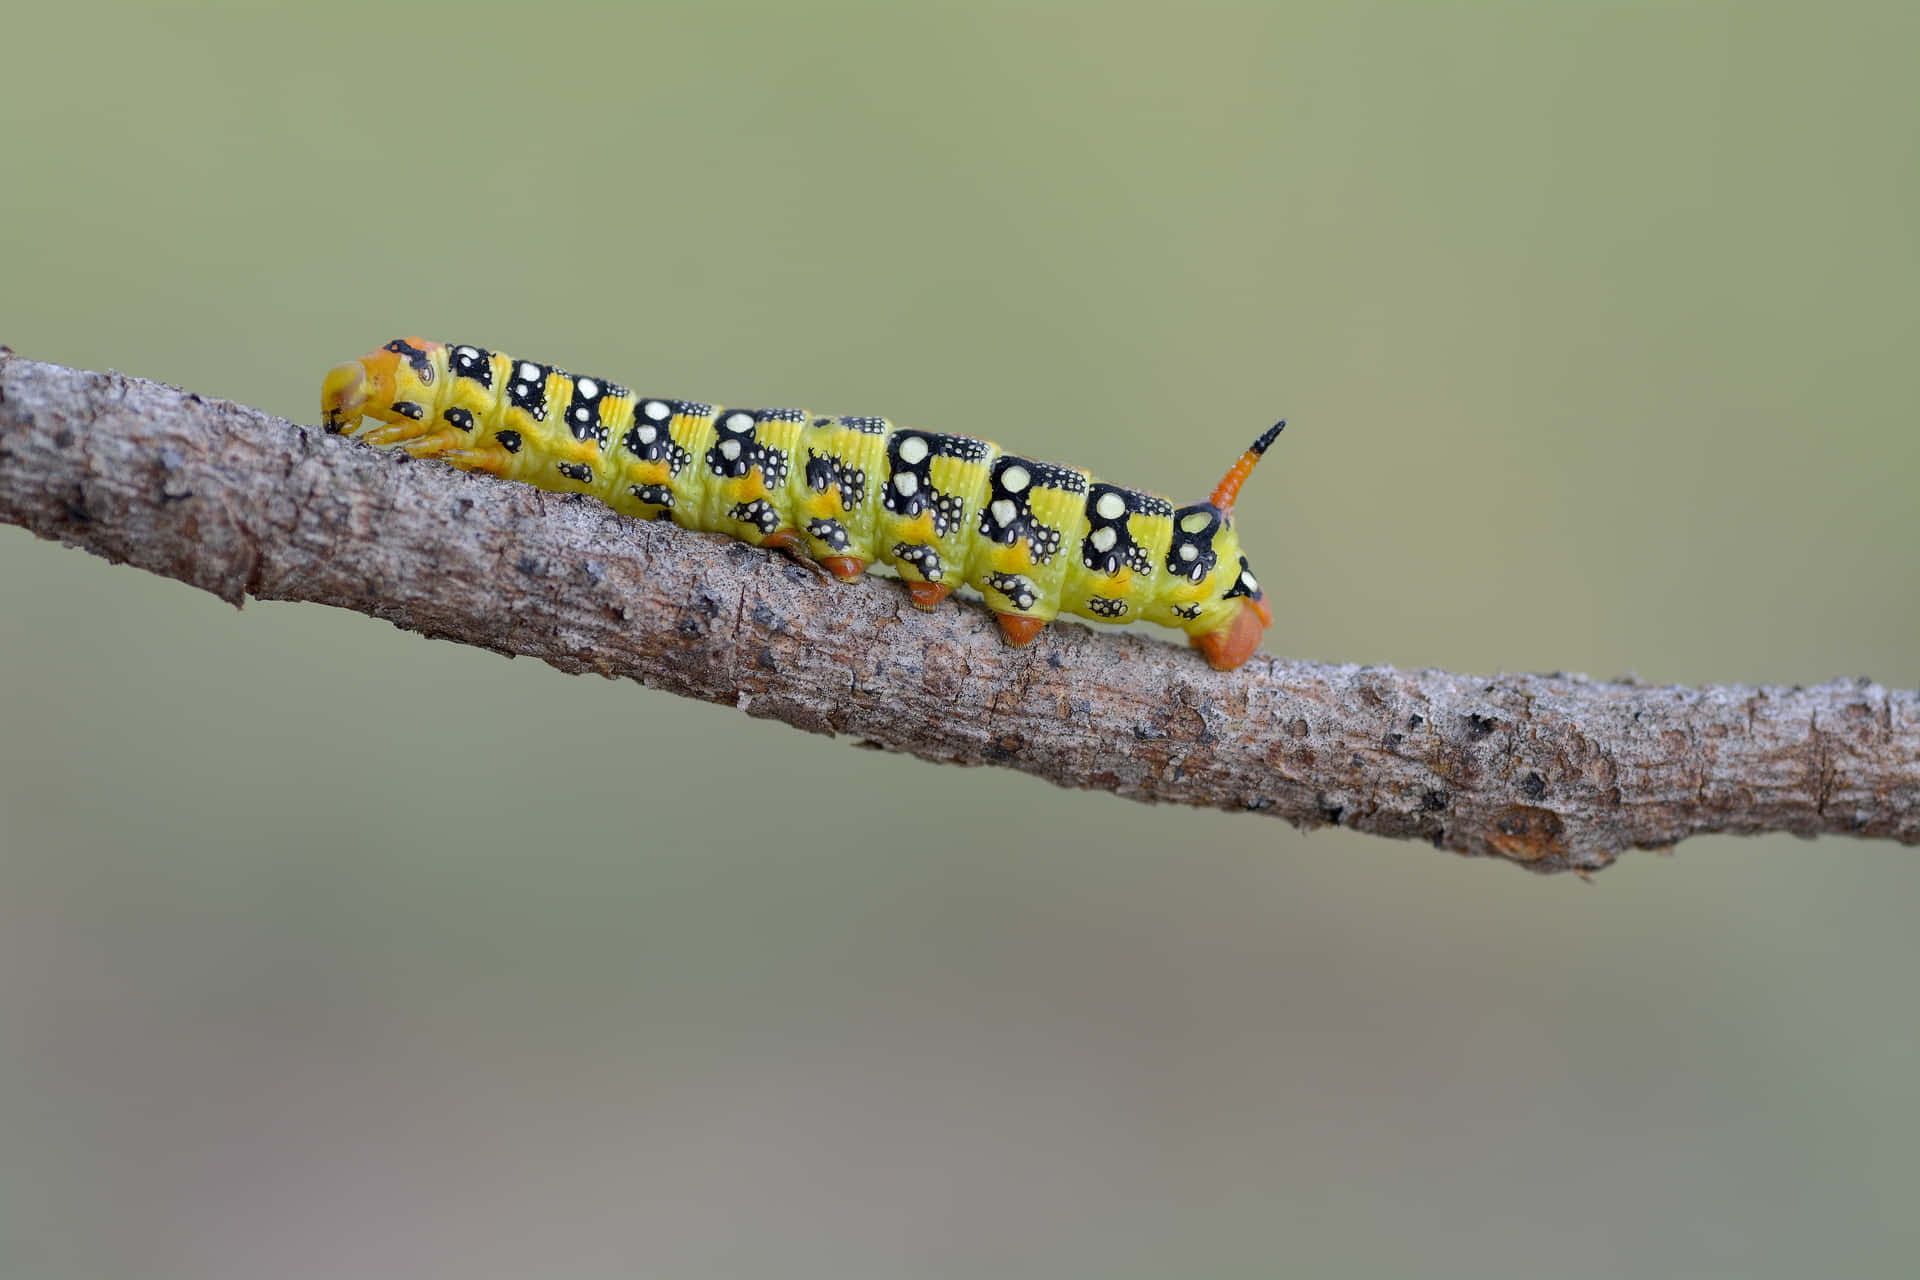 Image  A Shining Yellow Caterpillar on a Branch